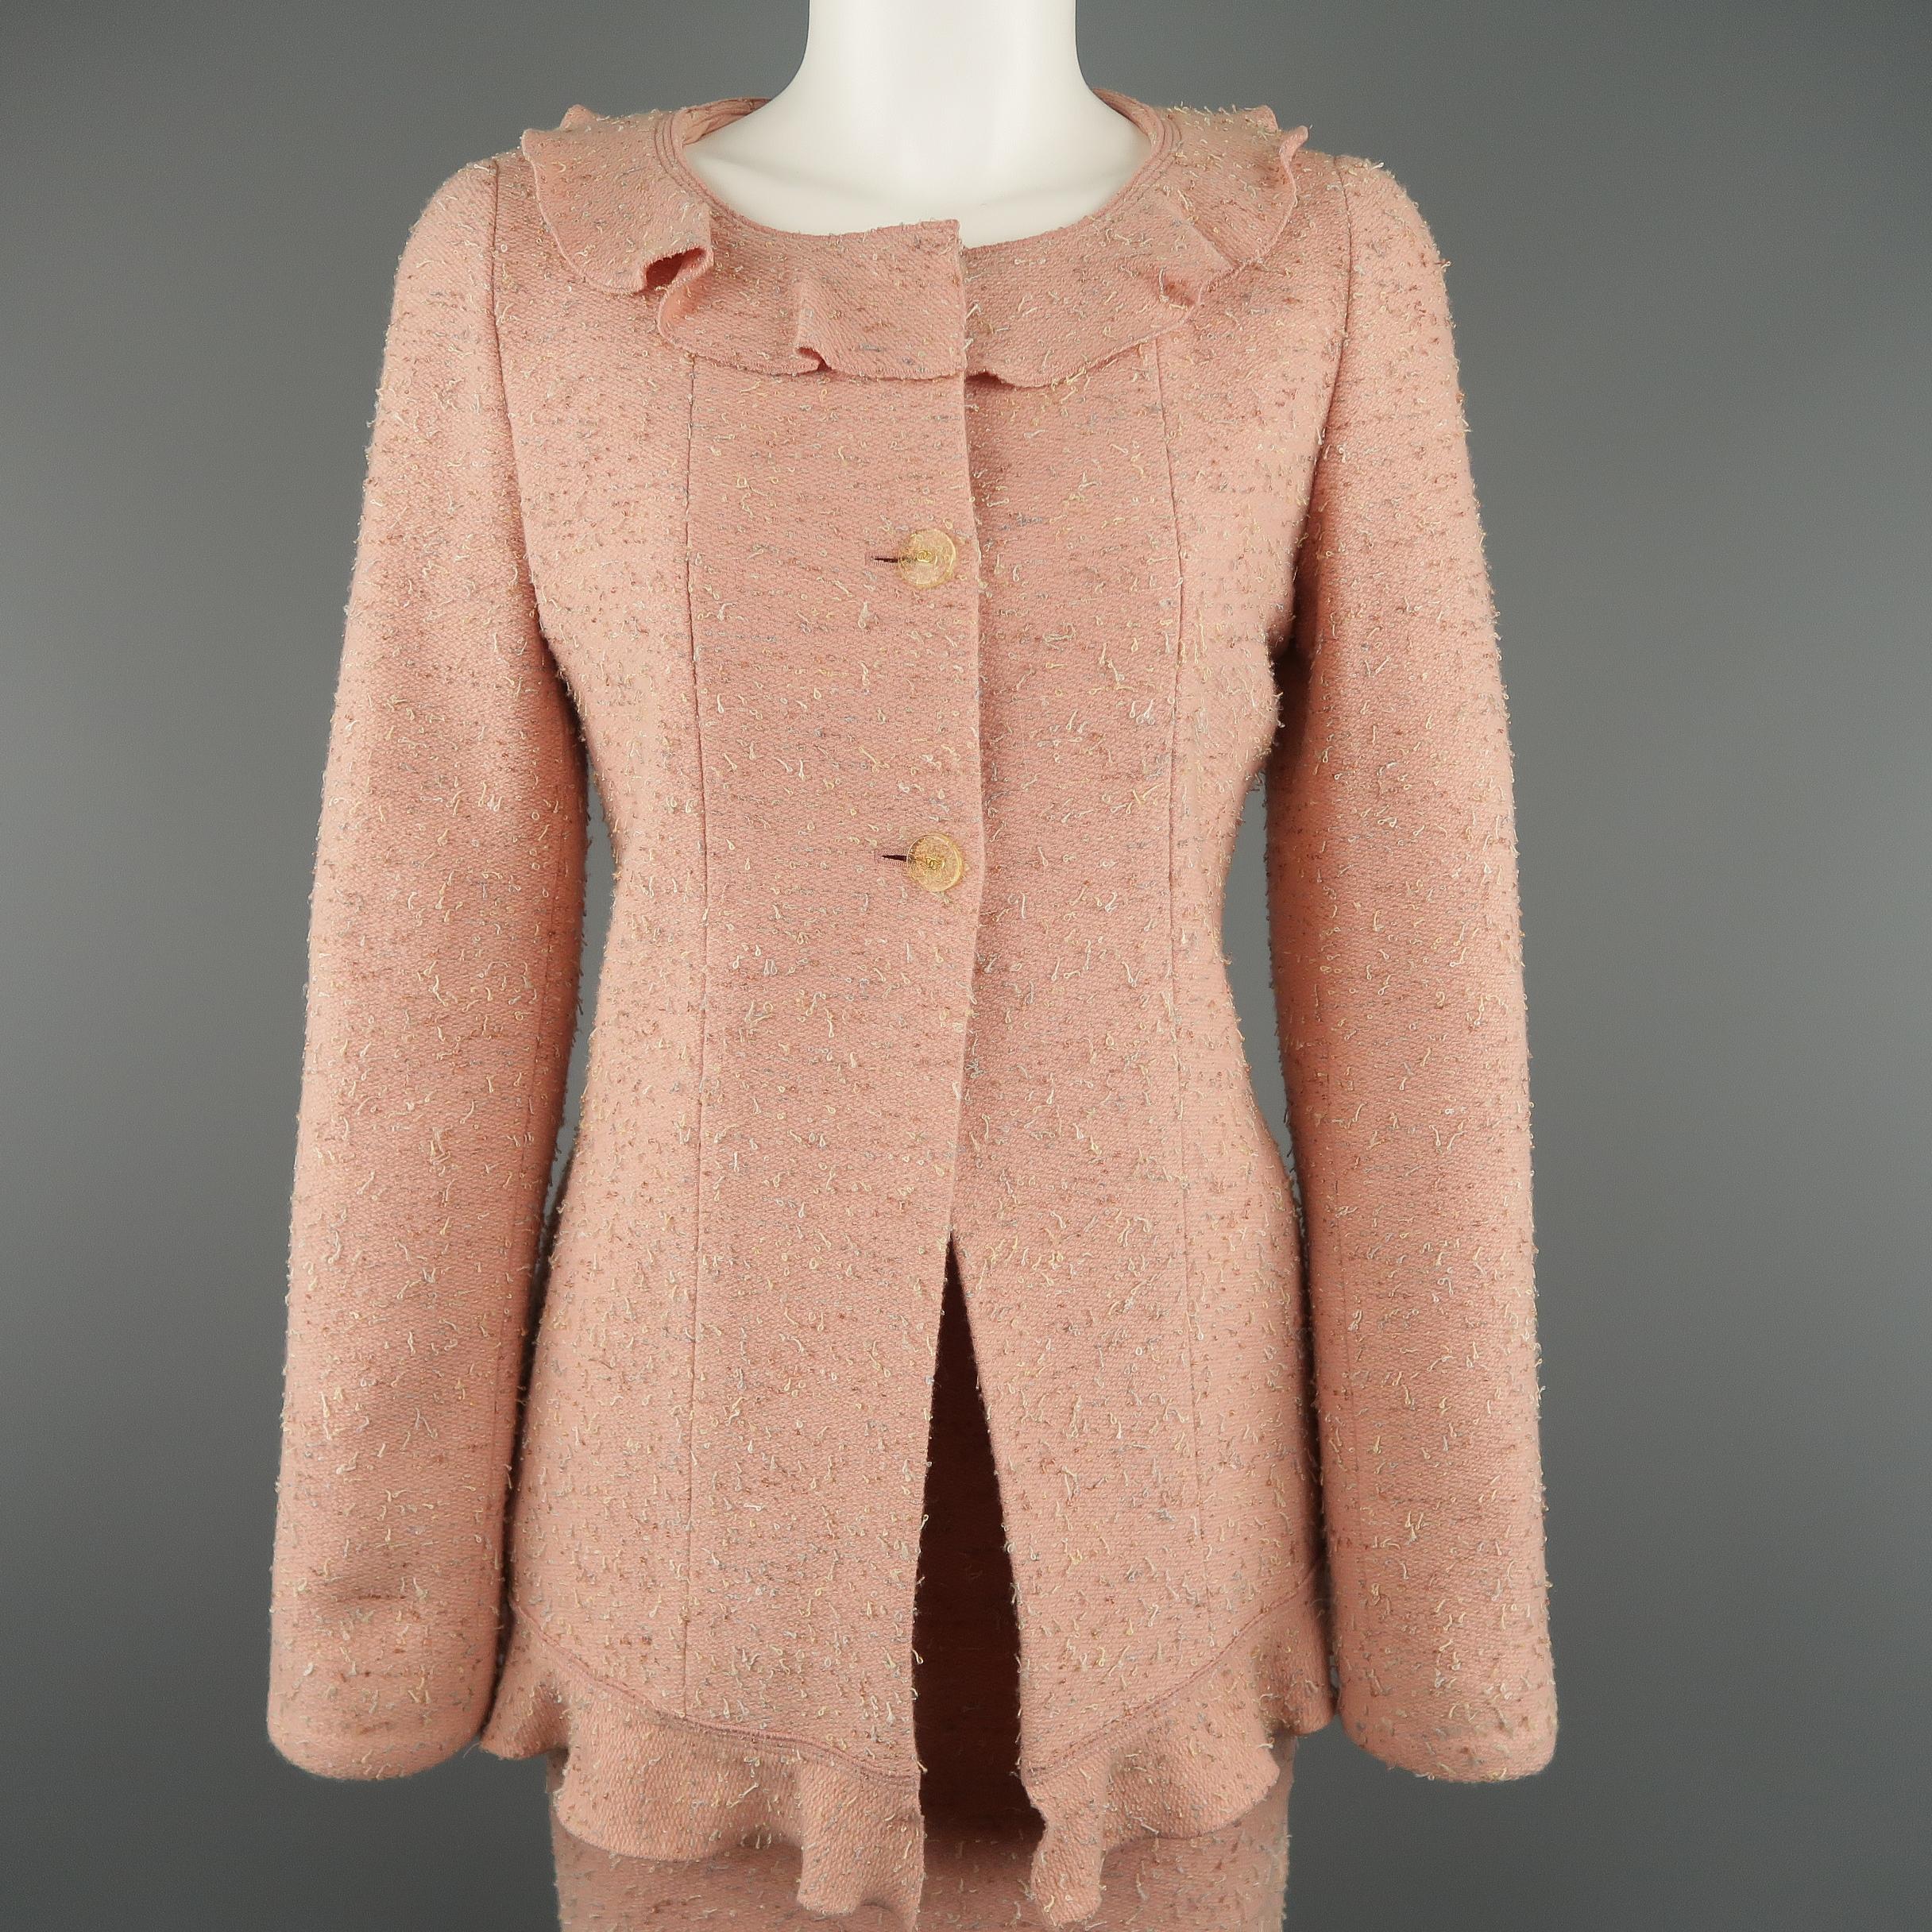 Vintage CHANEL Autumn Winter 1999 Collection suit comes in a muted pink wool blend textured tweed and includes a mid length jacket with a round collar, ruffle trim, and  three half button closure with a matching pencil skirt. Made in France.
